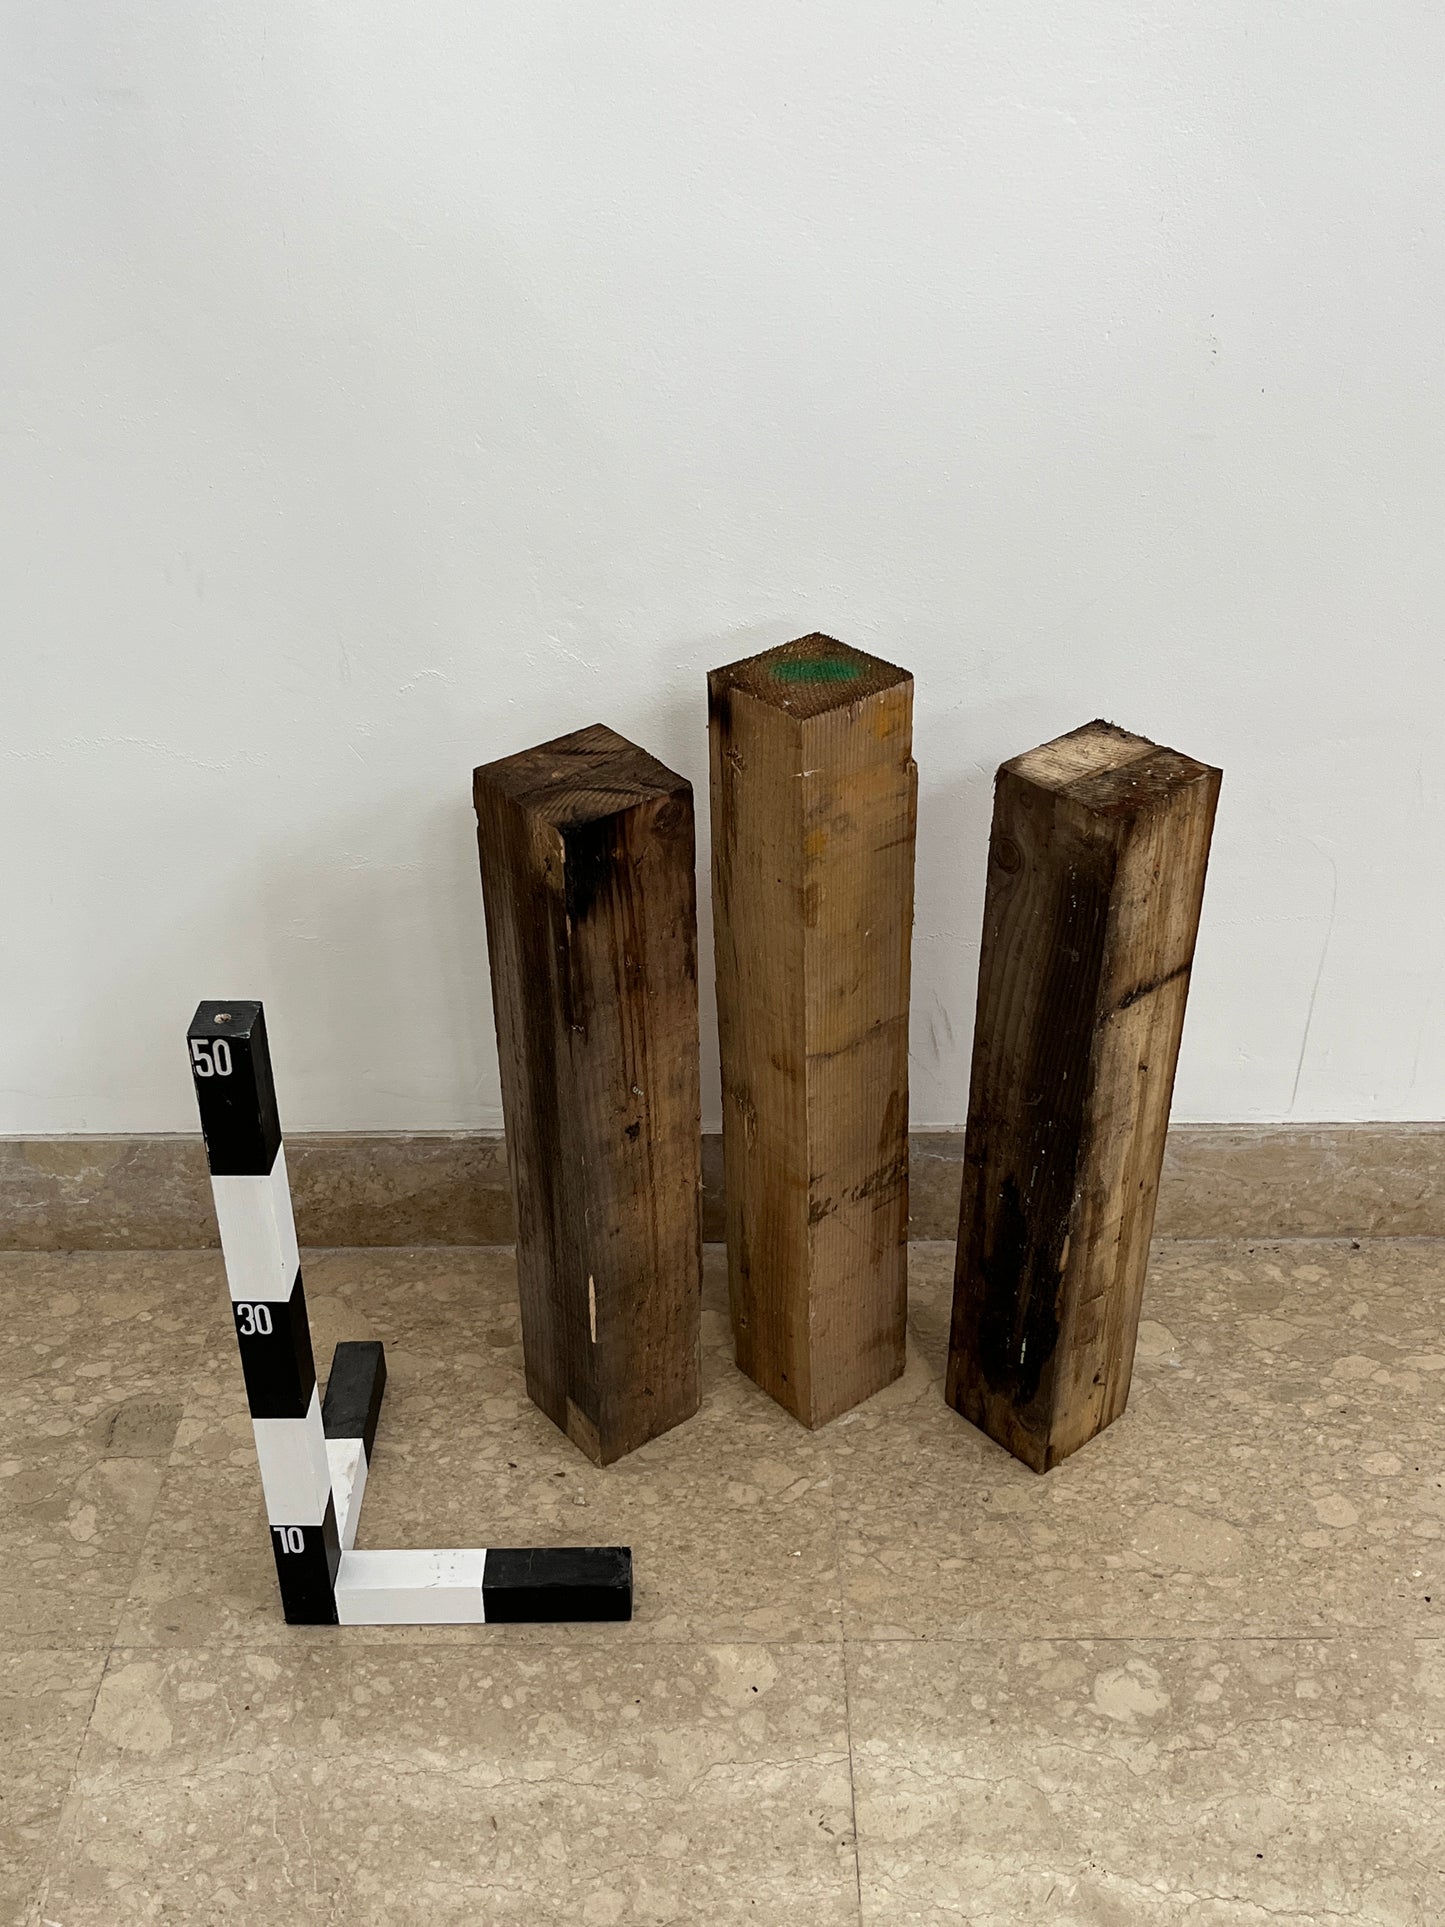 USED UP | Chilean Pavilion │ Structural Timber, 1.3.2